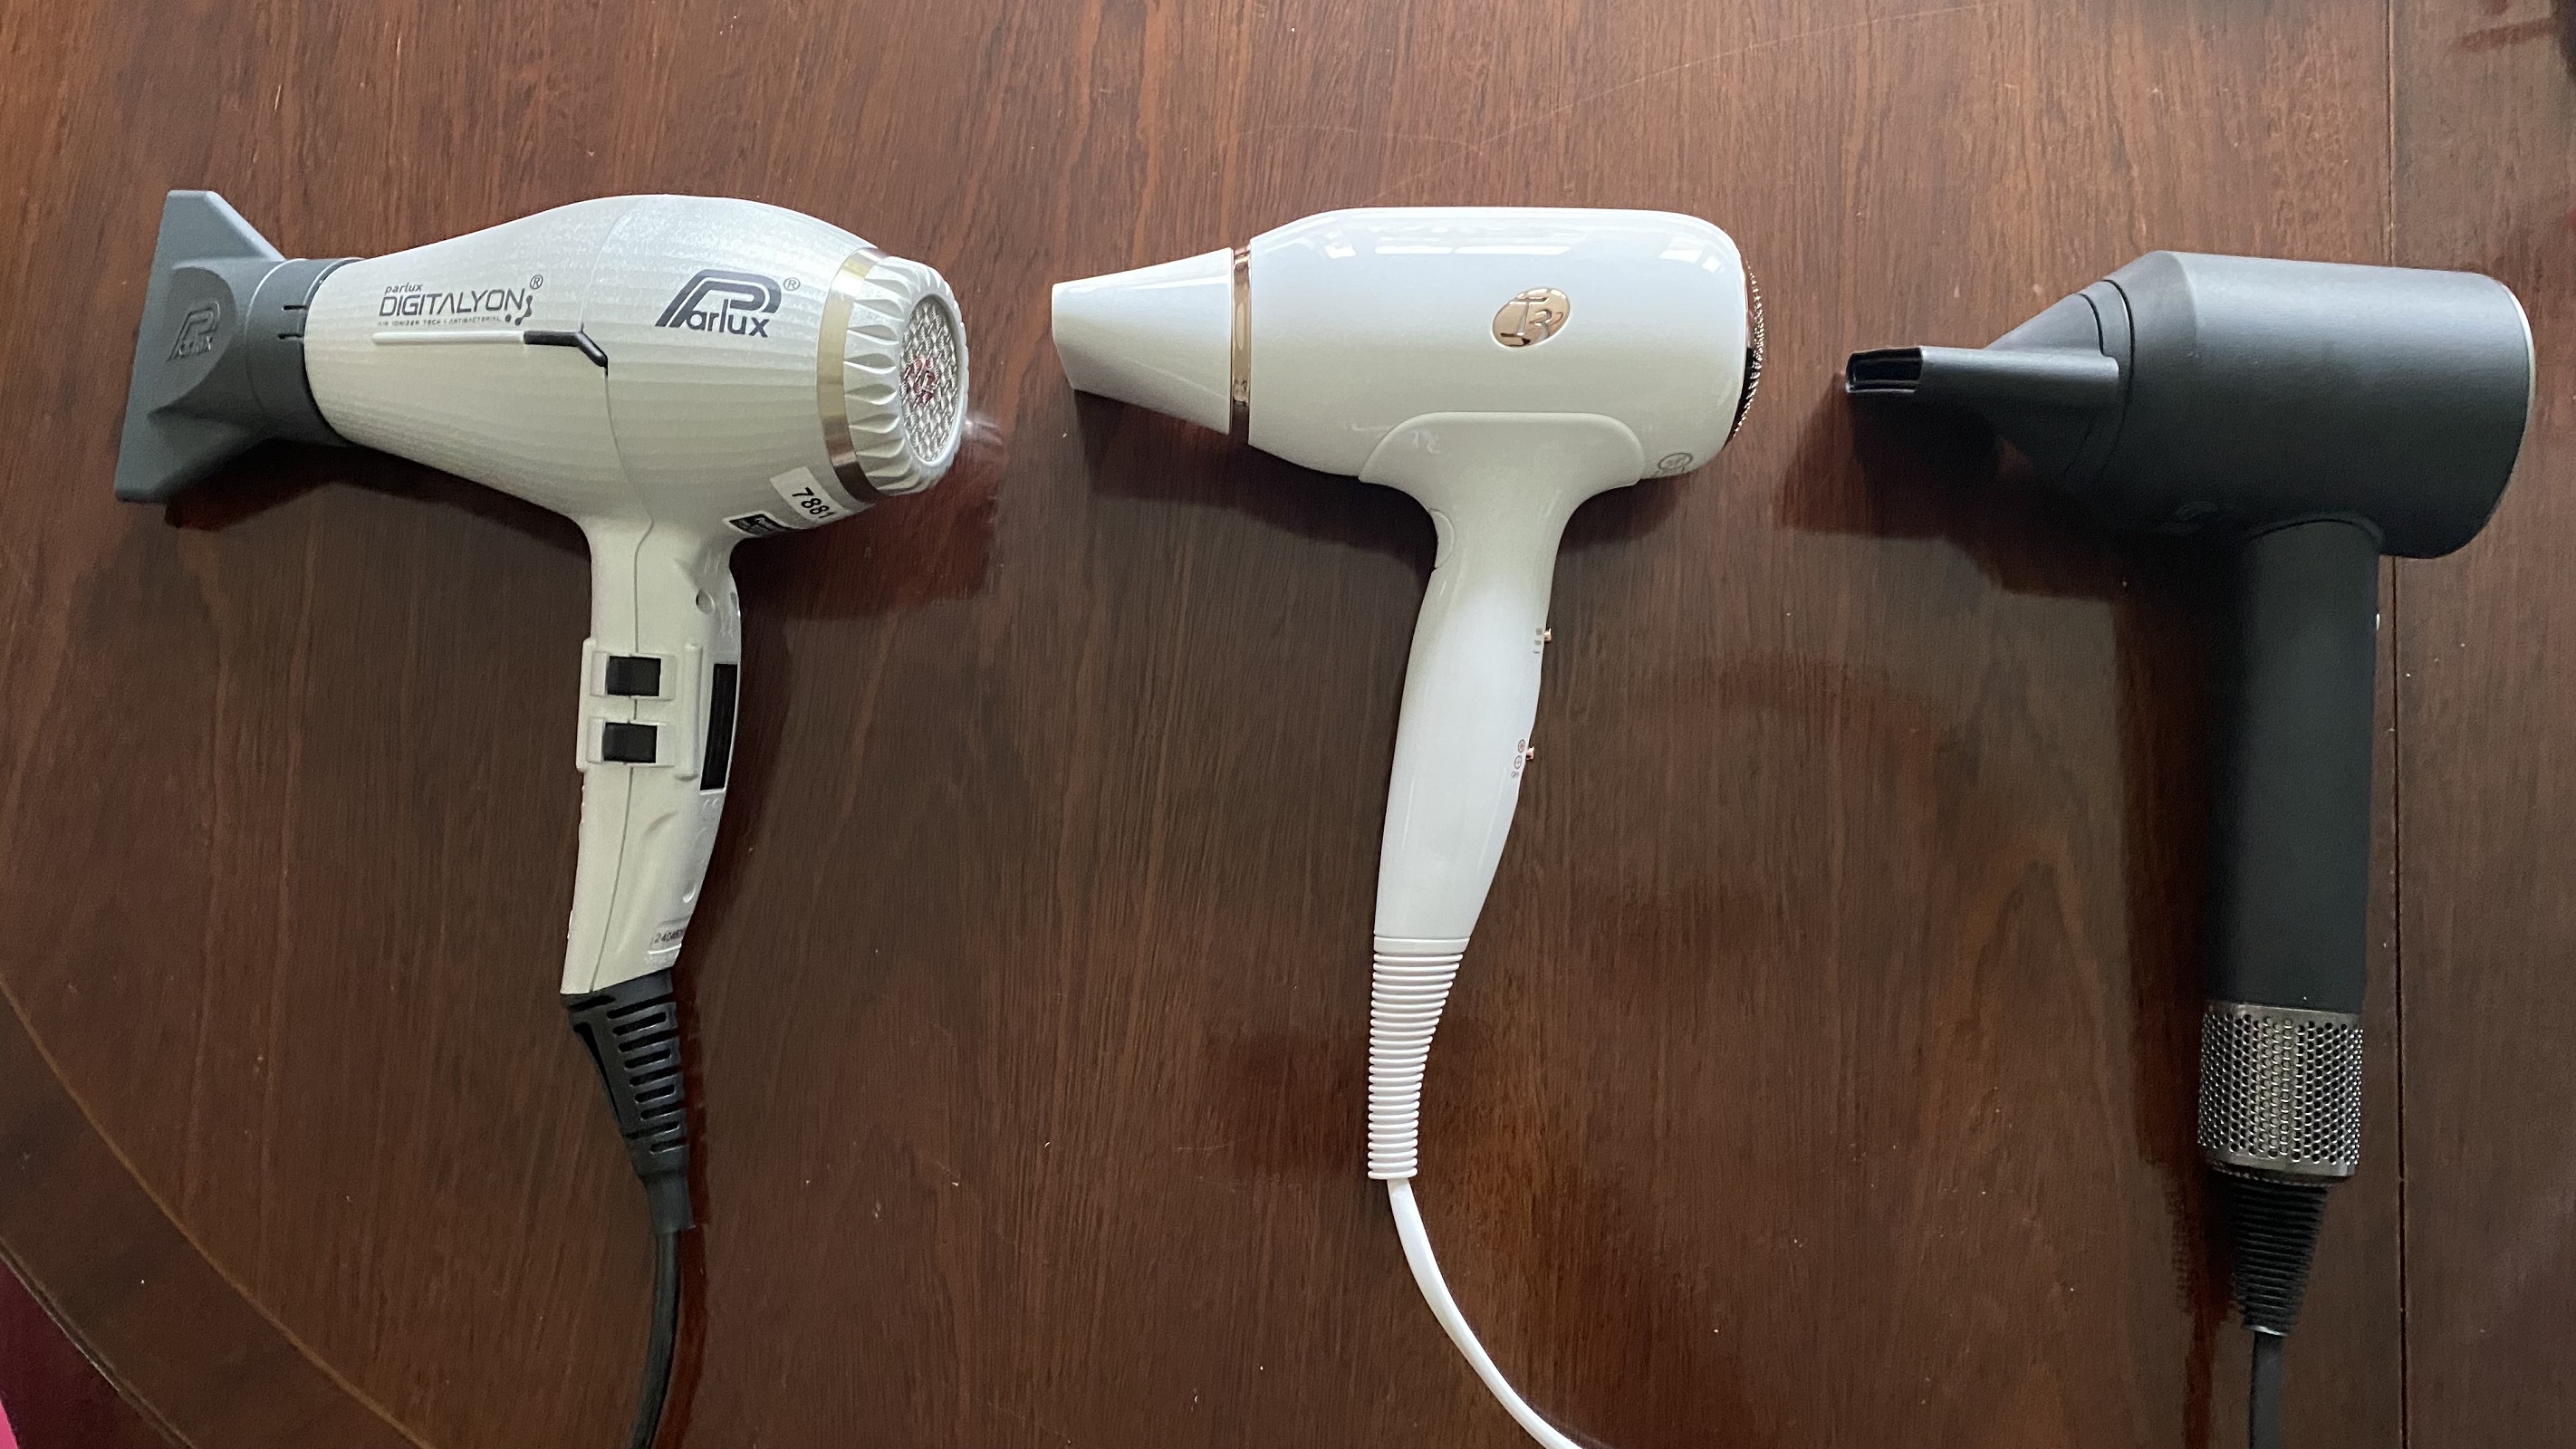 T3 Fit comparison with other compact hair dryers